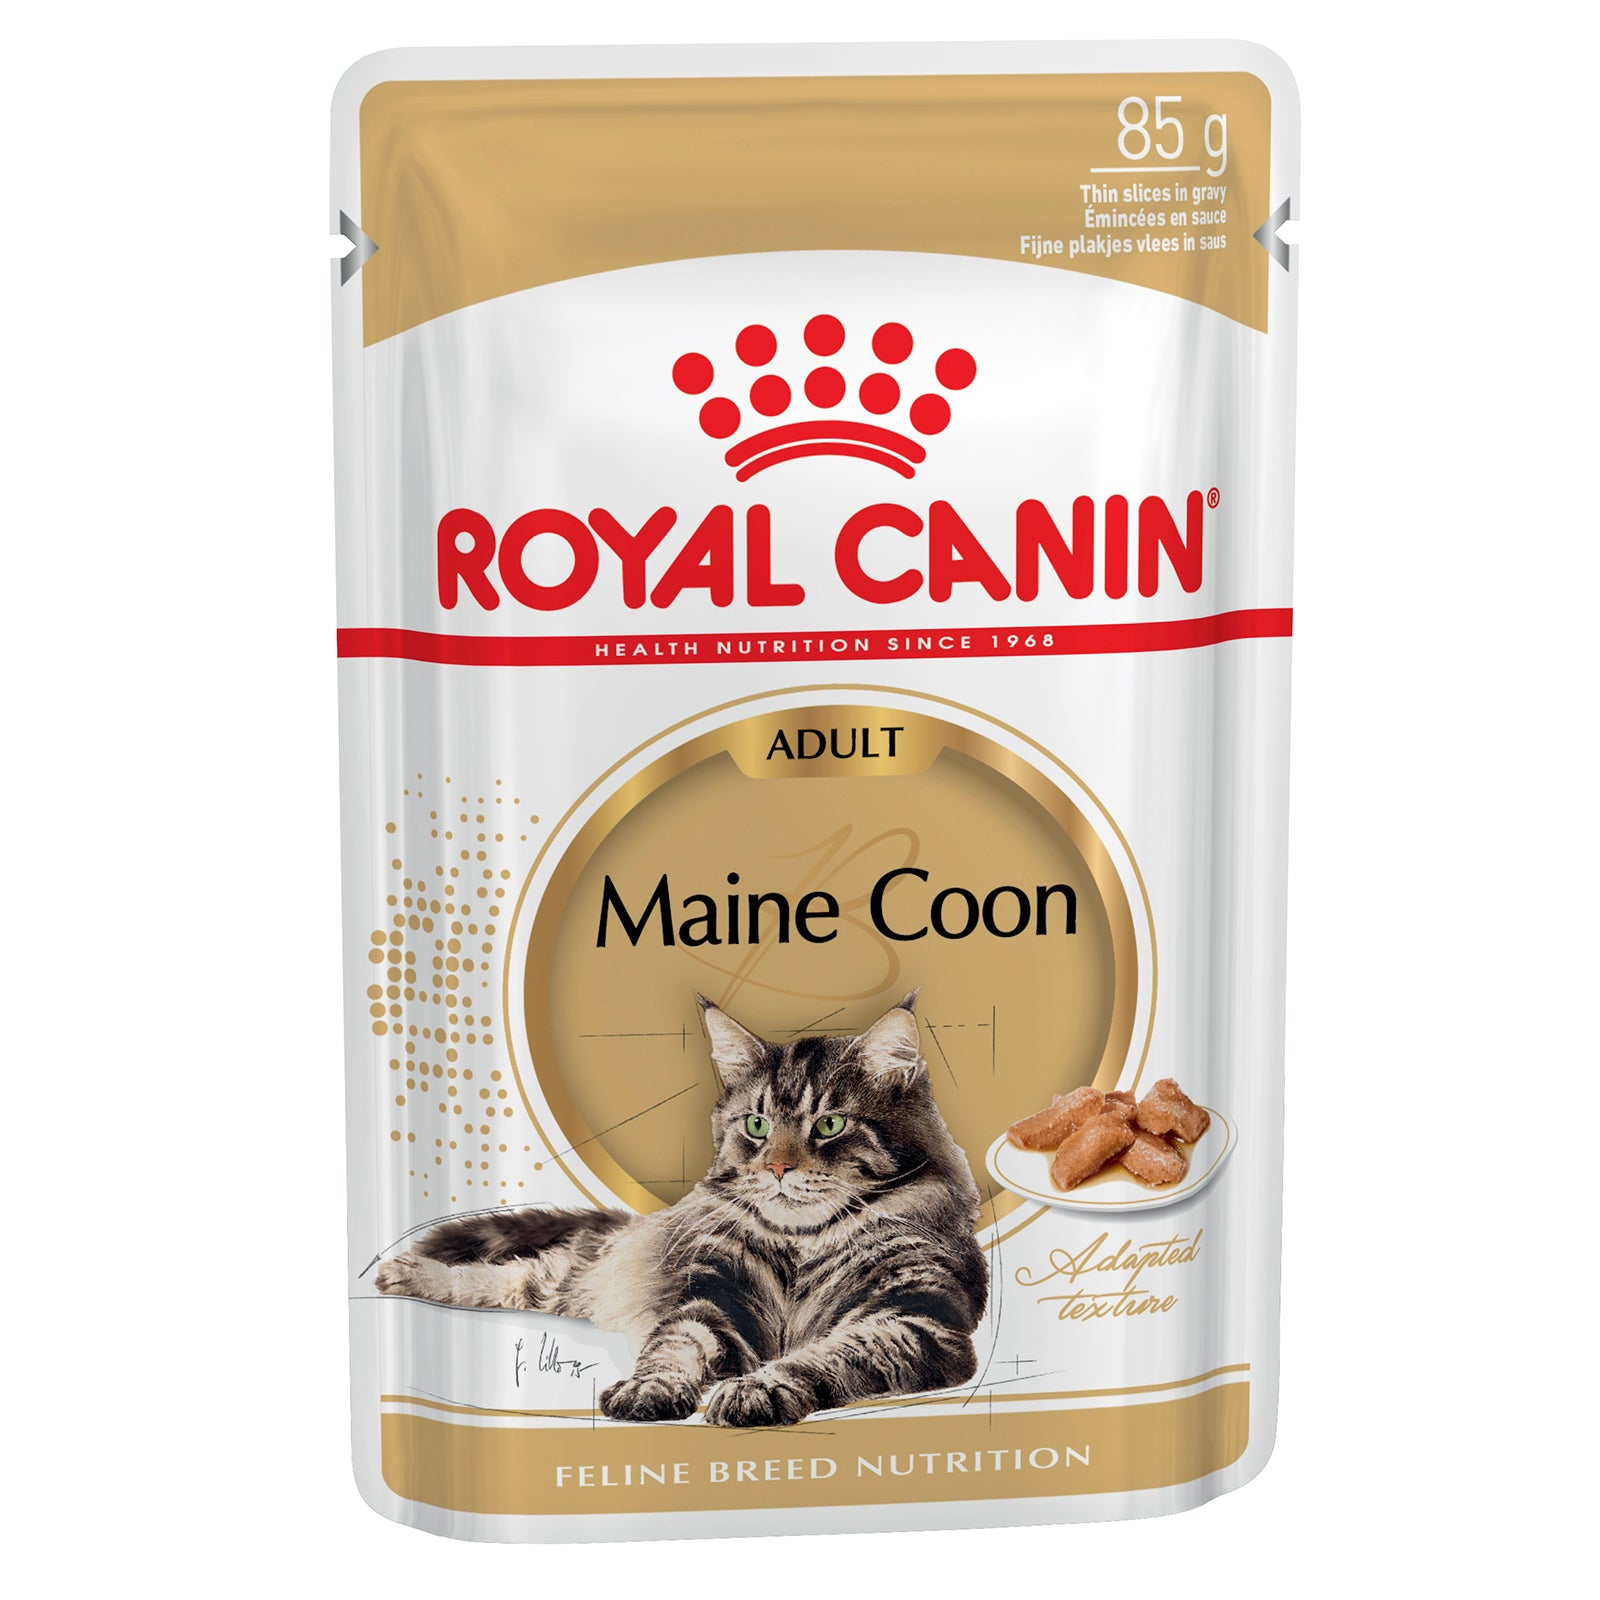 Royal Canin Cat Food Pouch Adult Maine Coon in Gravy